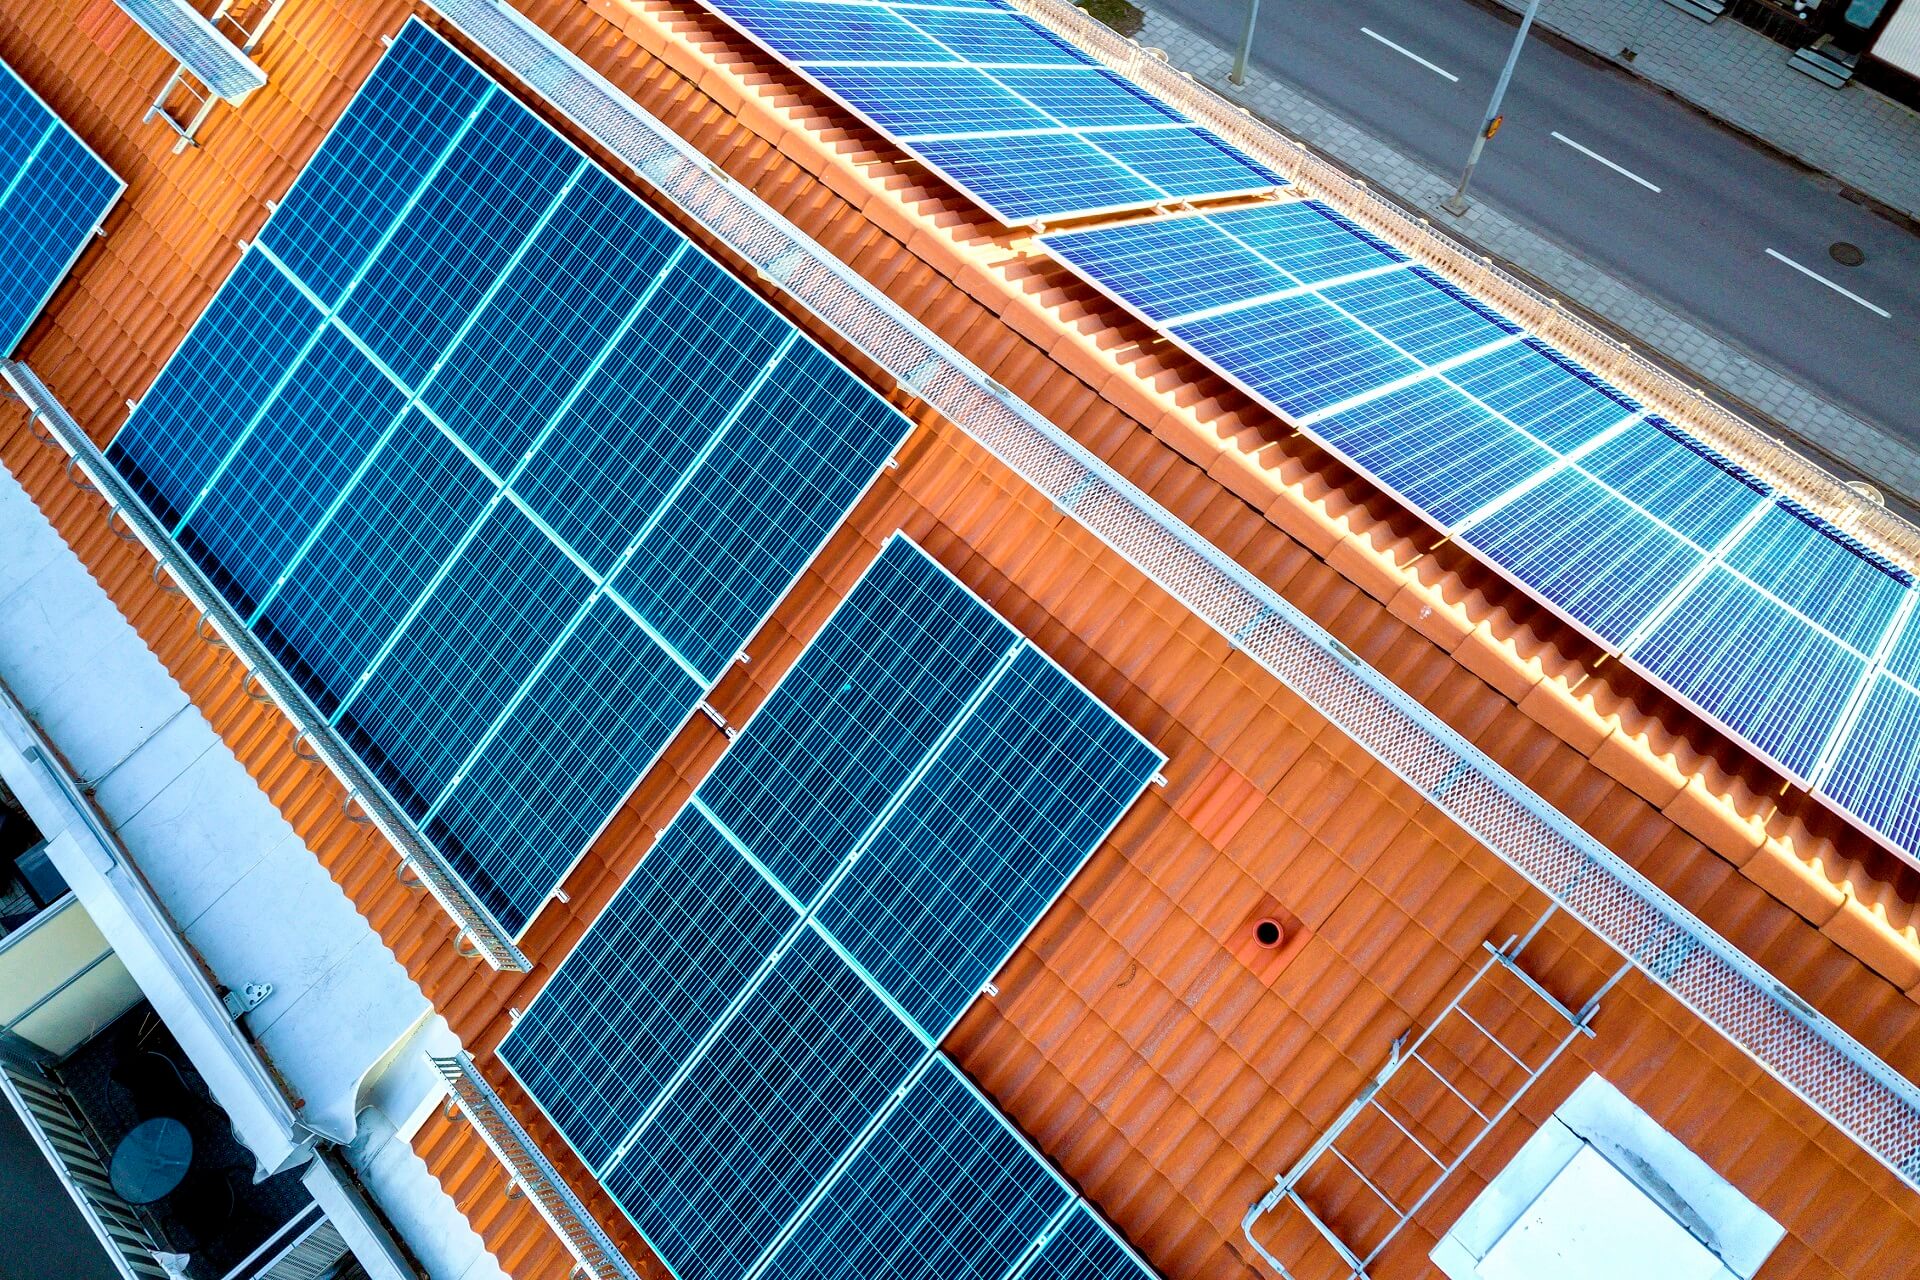 photovoltaic cells and solar panels - what are the differences